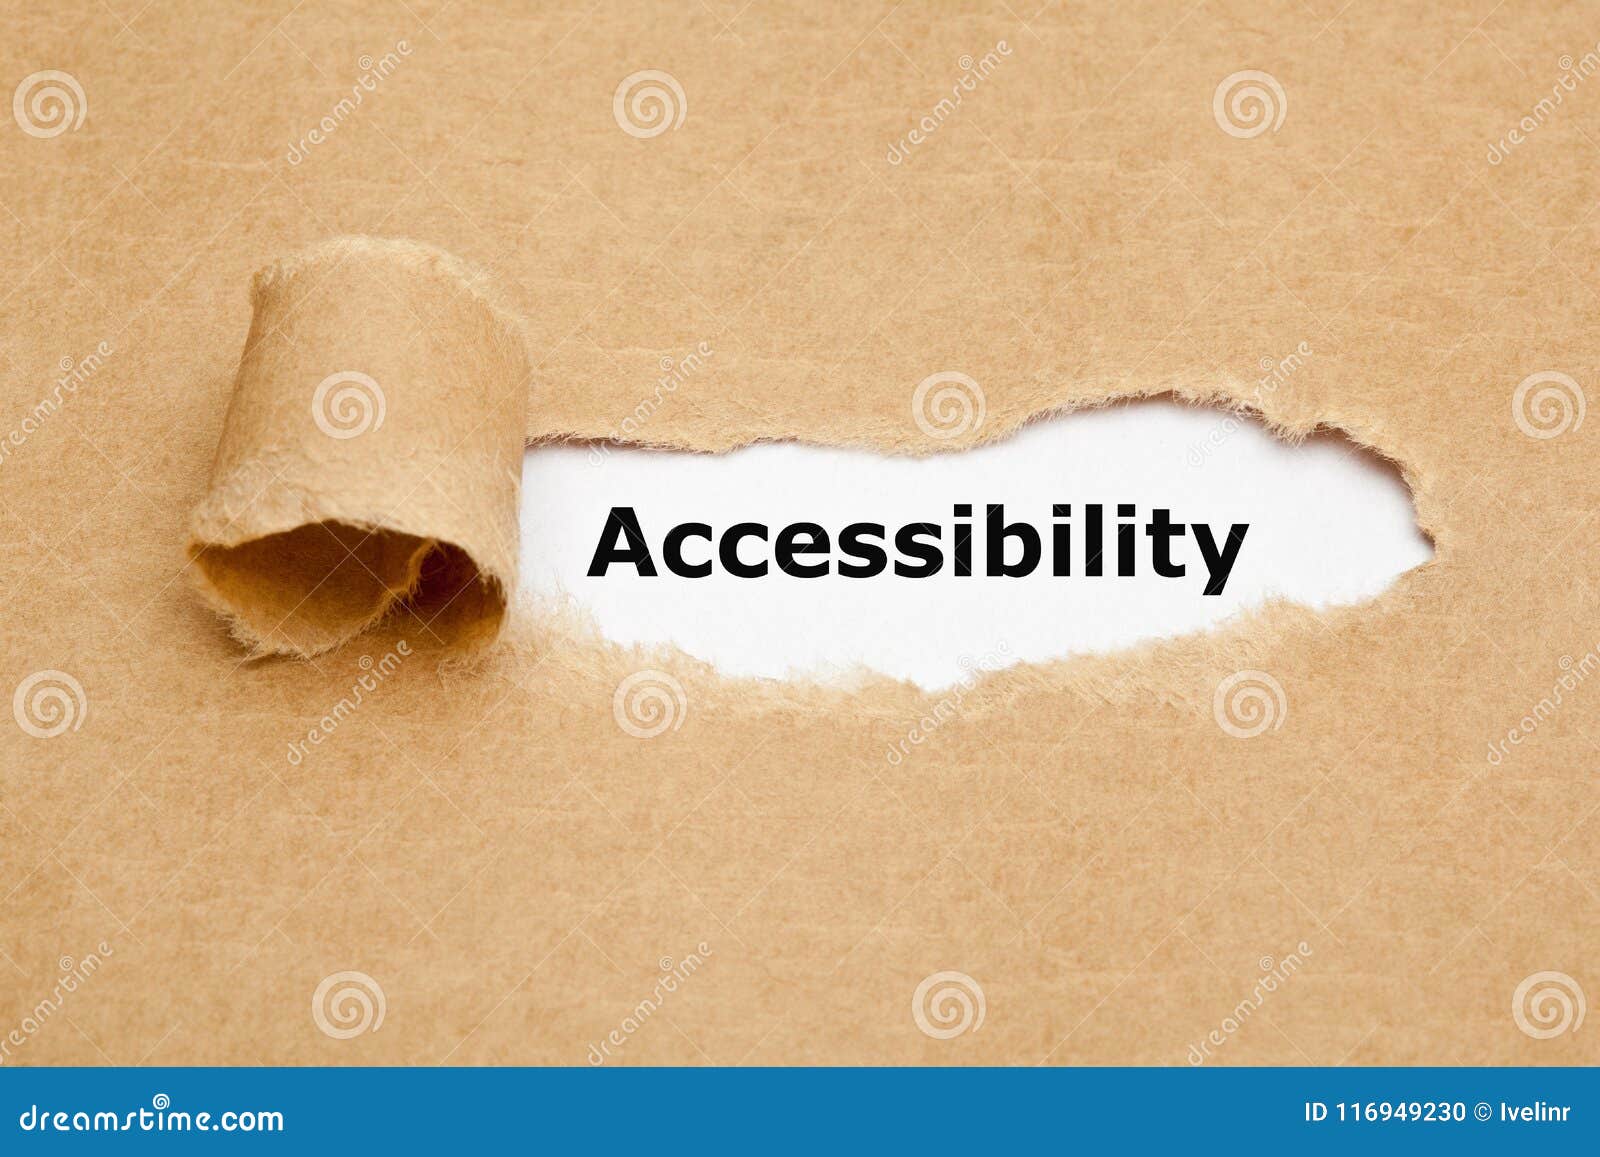 accessibility ripped brown paper concept